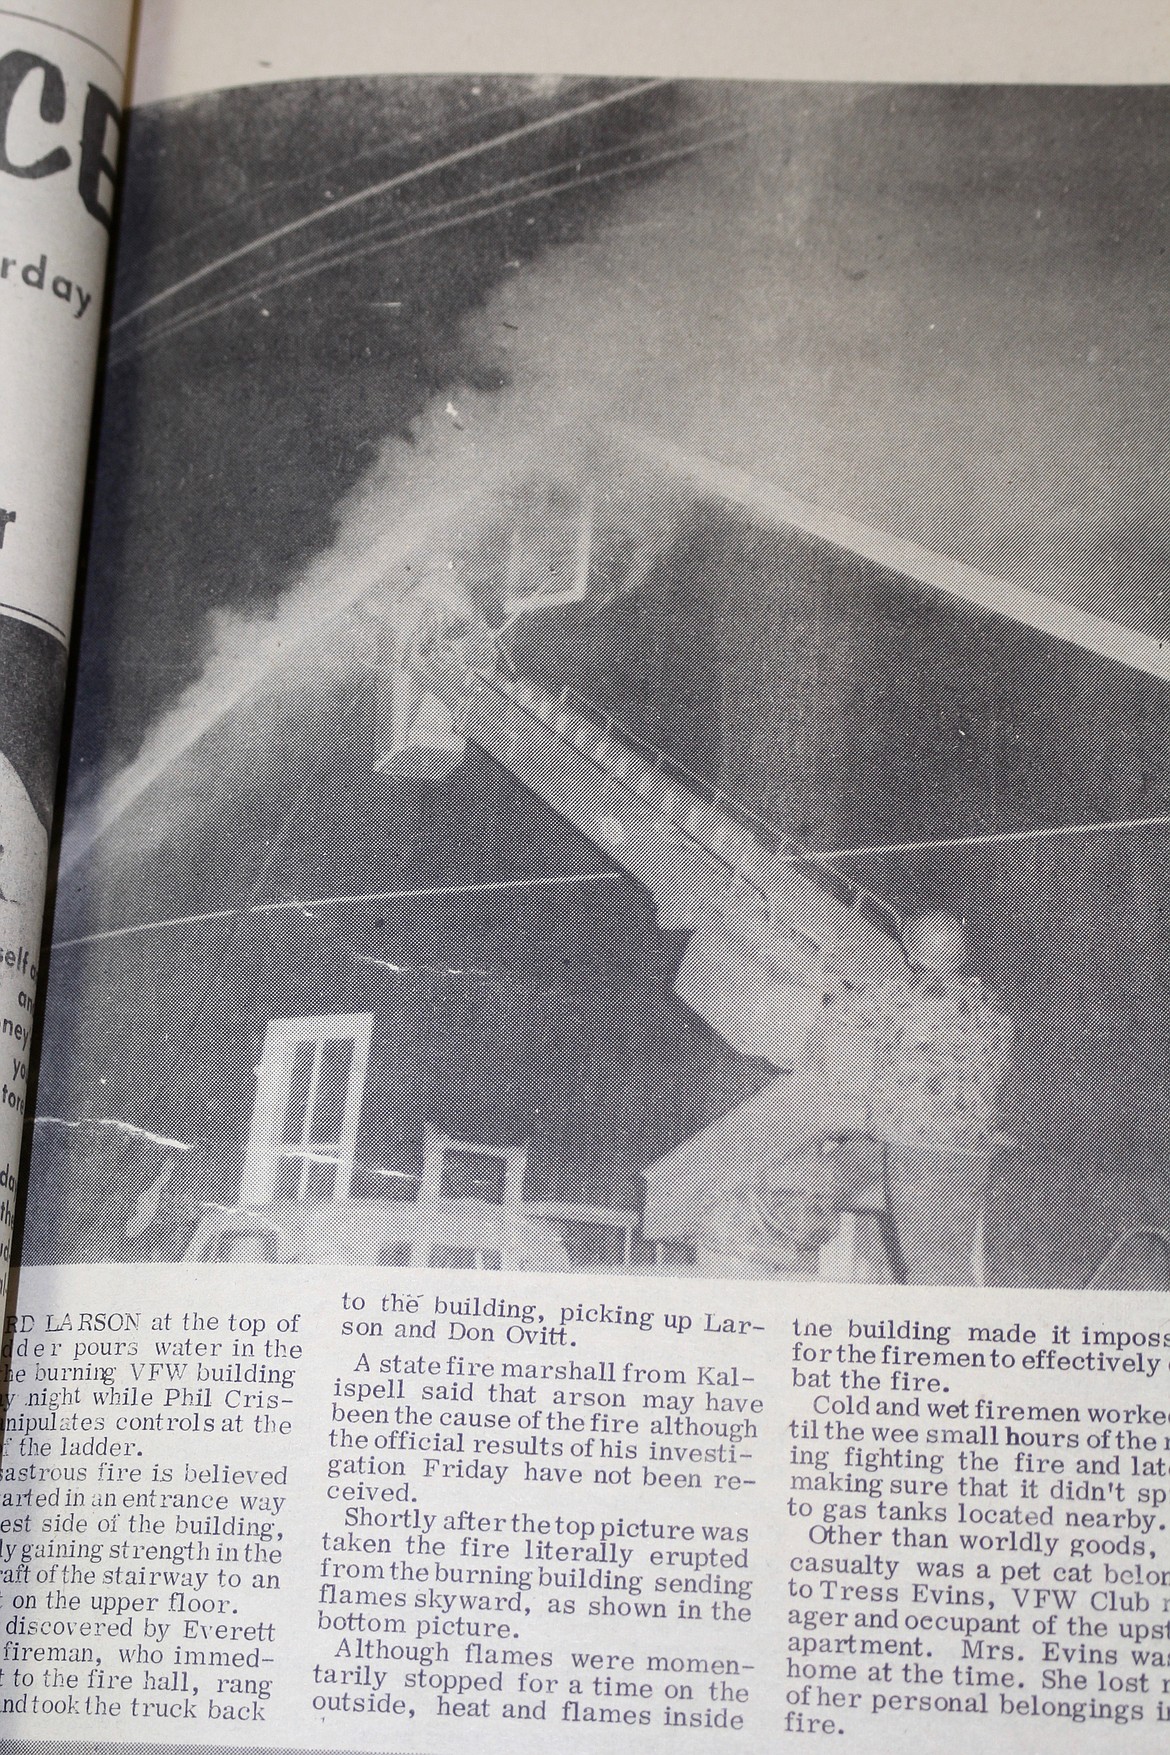 THIS NEWSPAPER clipping shows Leonard Larson at the top of the ladder pouring water inside the VFW. In the lower right of the photo operating the controls is Phil Crismore.